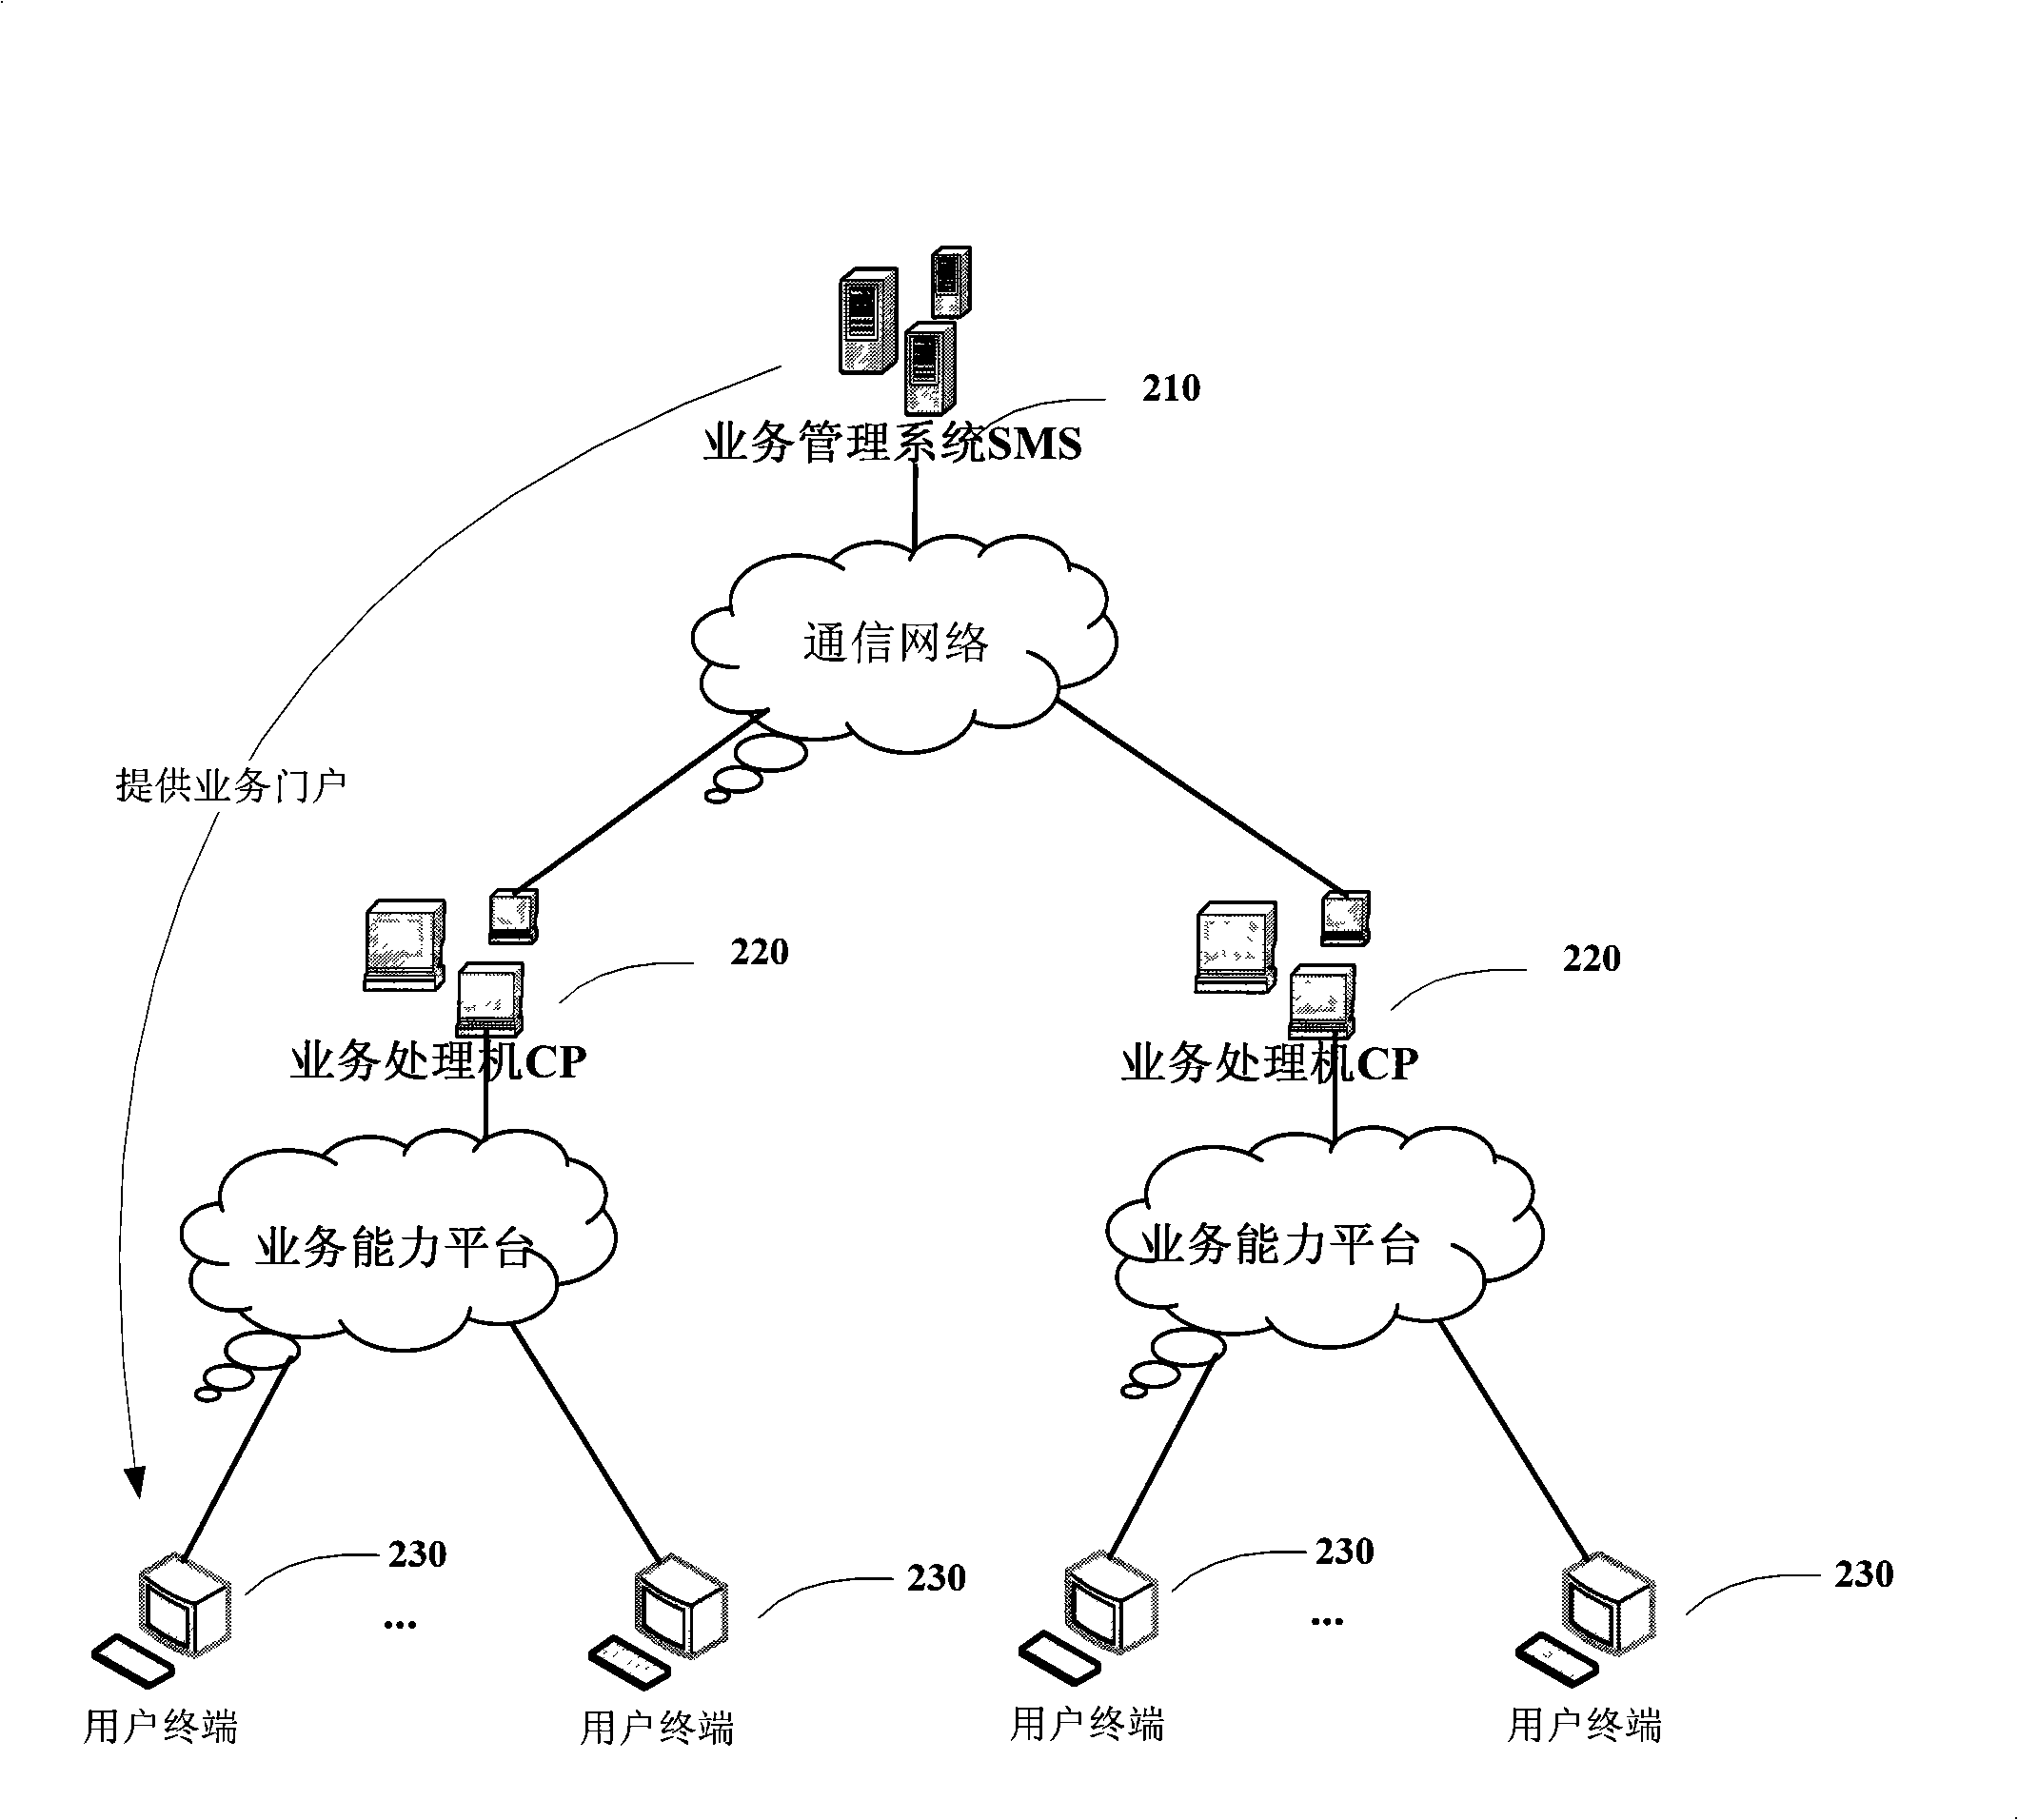 Unification video signal system and method with separated business management and business control